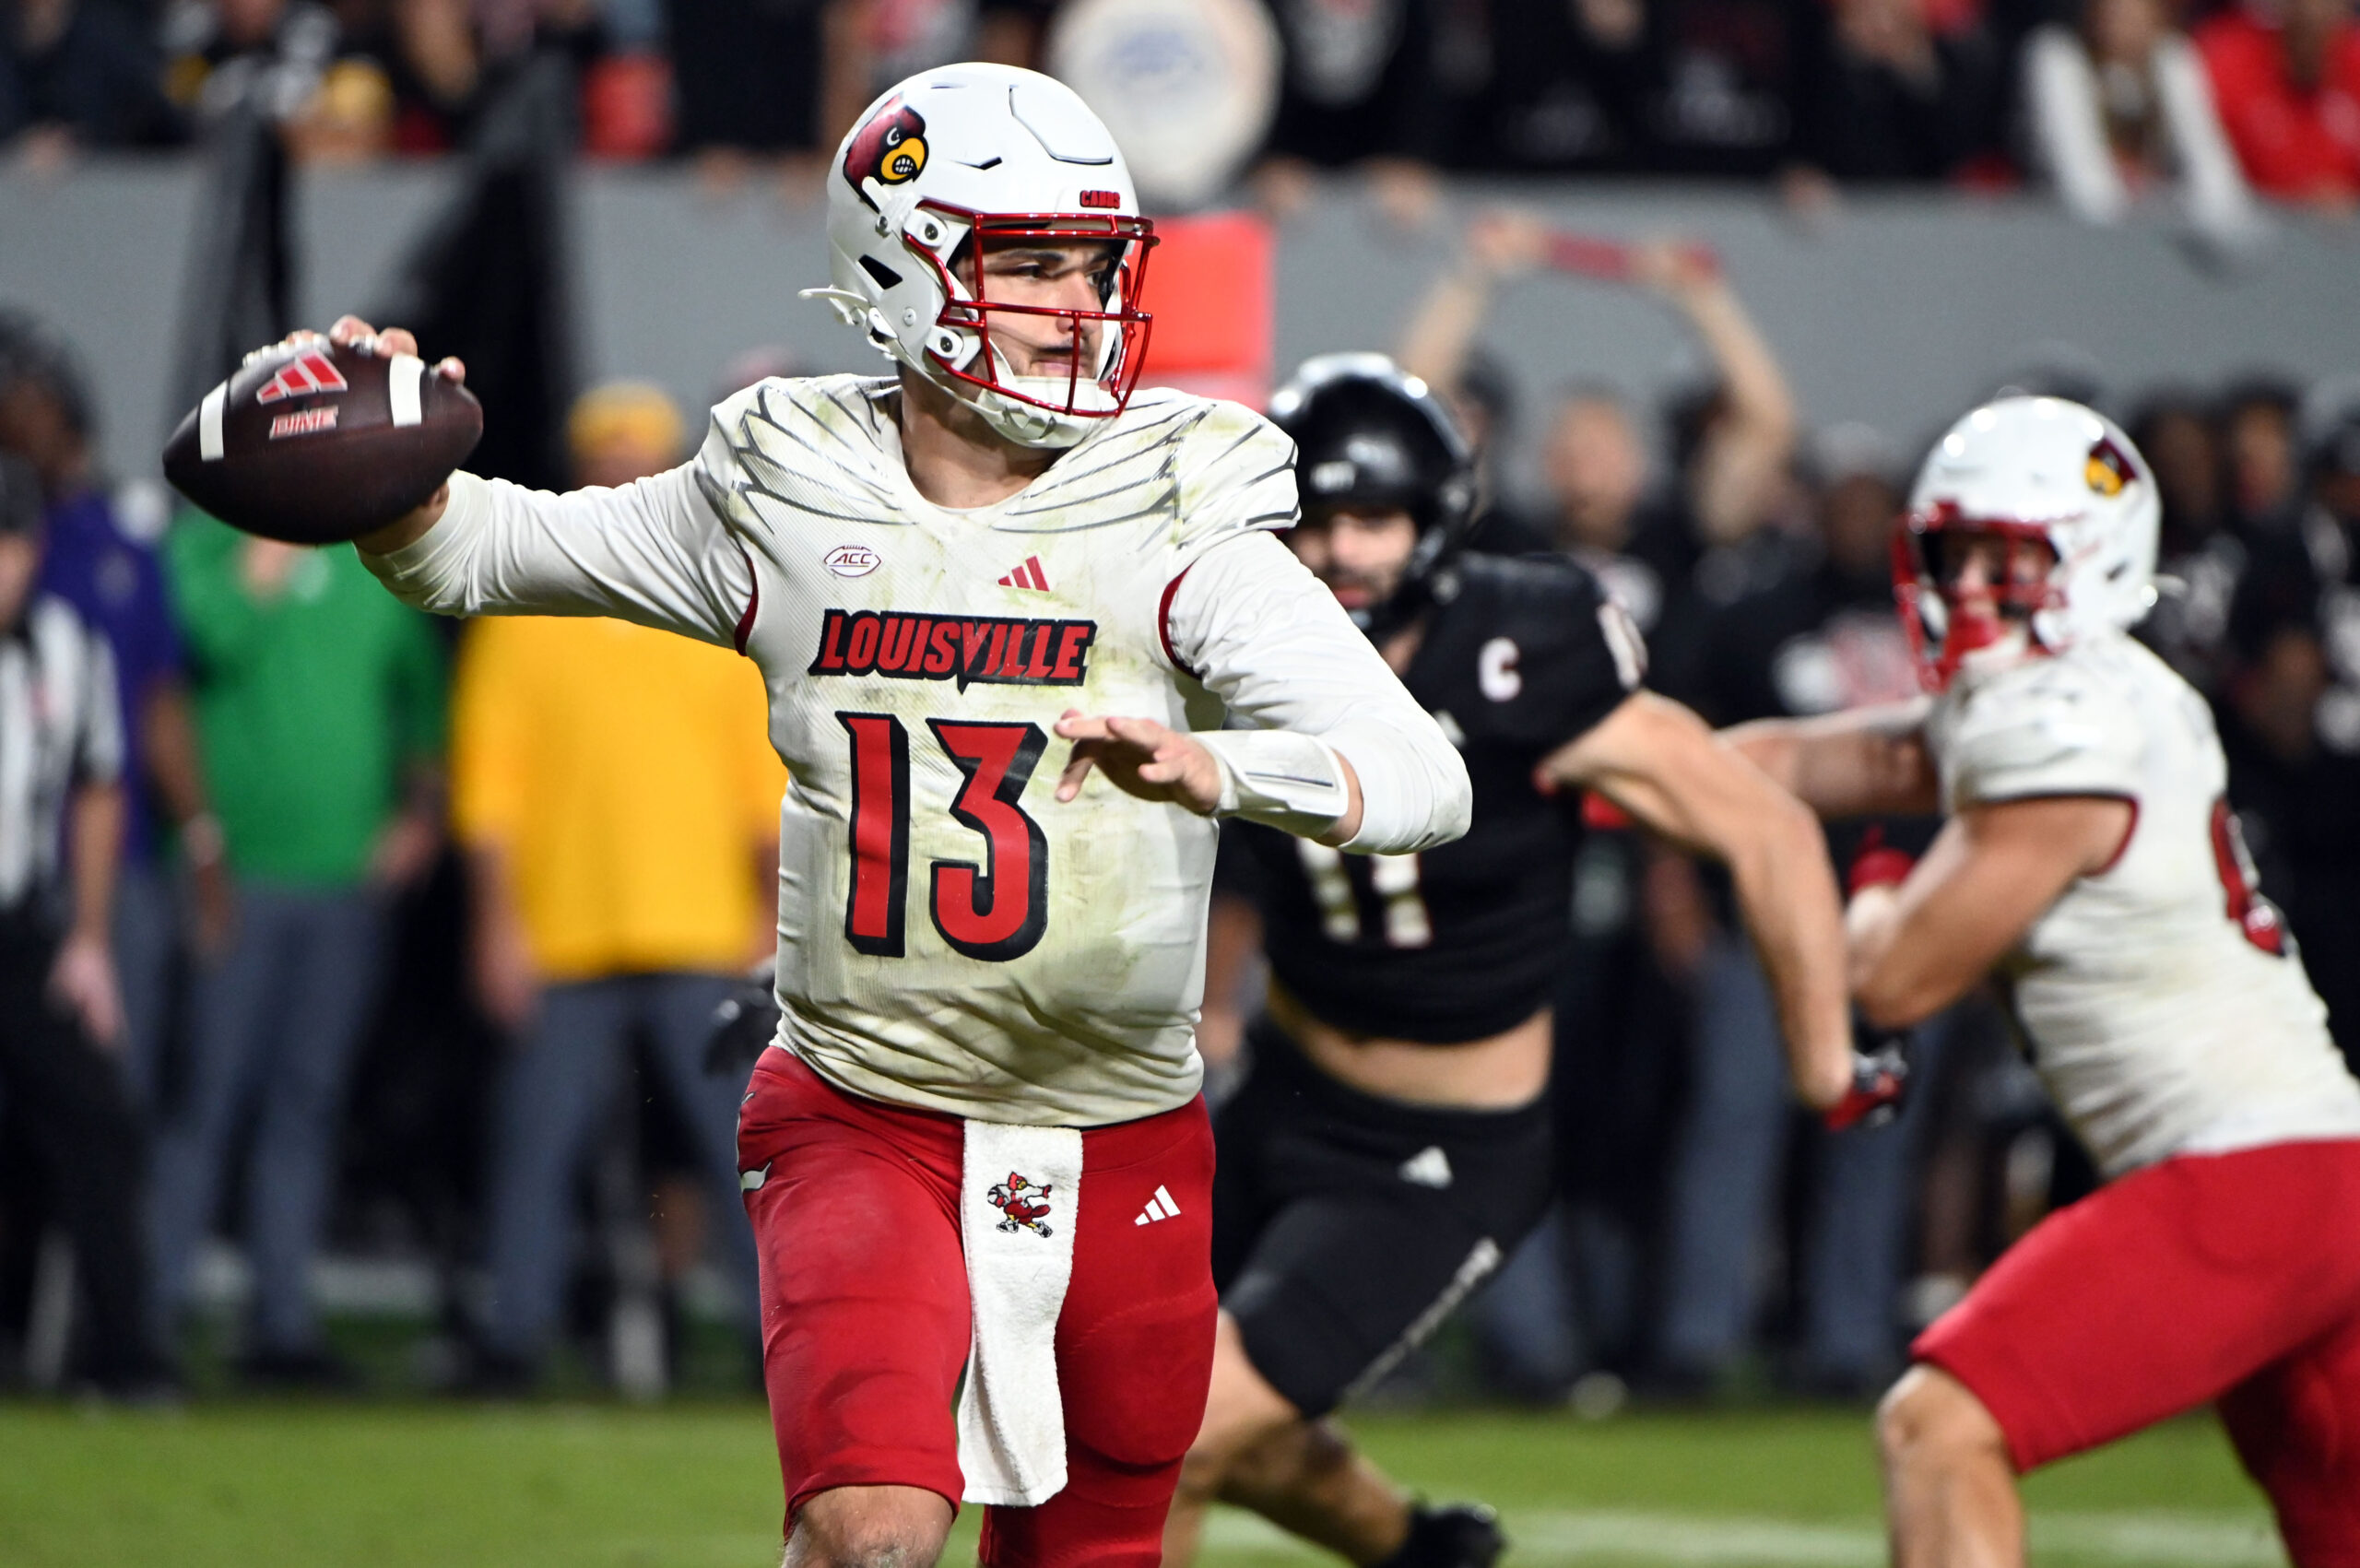 Louisville Football Opens as Home Favorite vs. James Madison